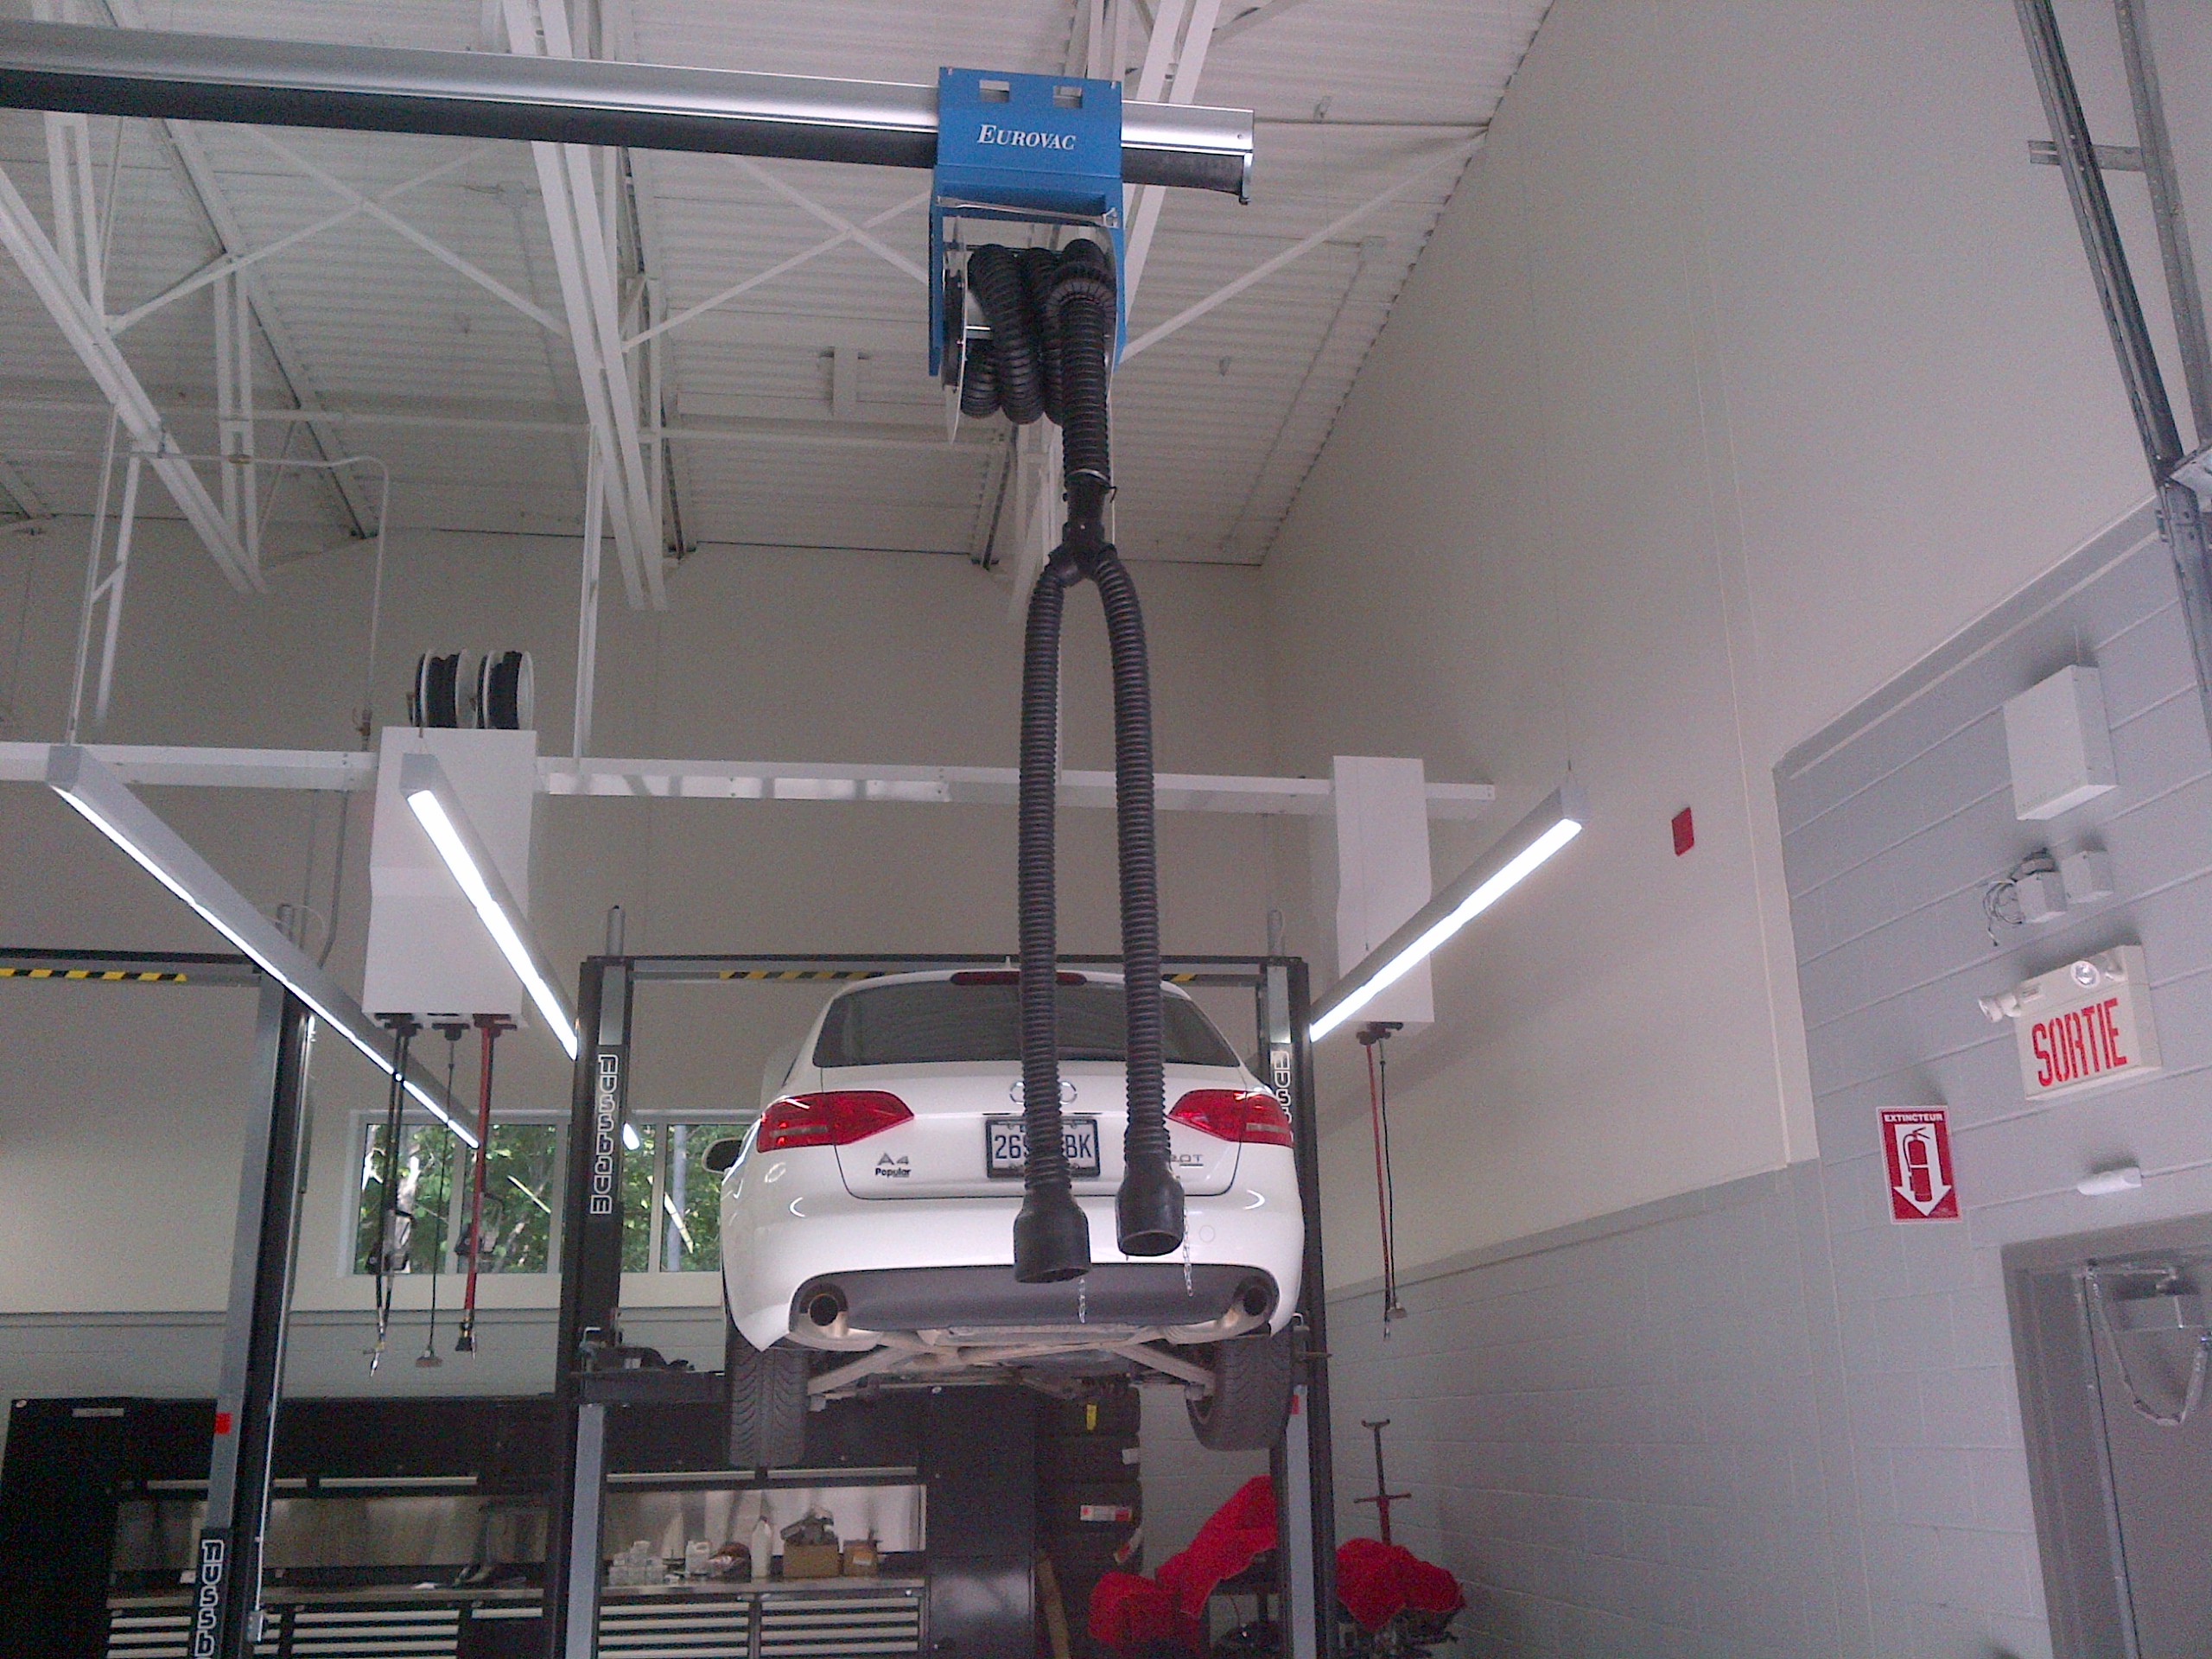 Vehicle Exhaust Extraction Systems